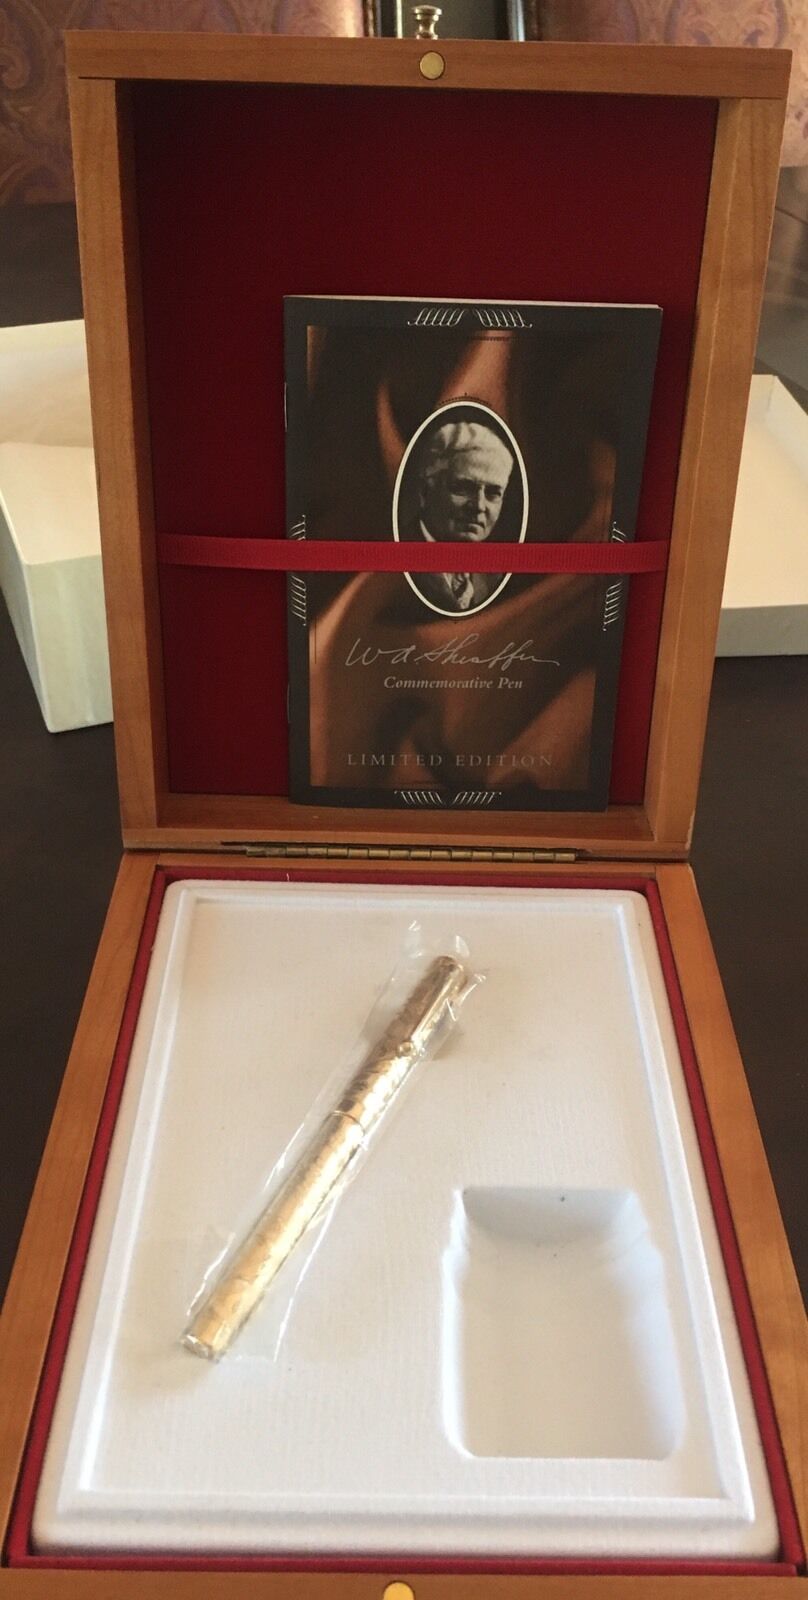 W. A. Sheaffer Commemorative Fountain Pen; Limited Edition #5558 of 6000